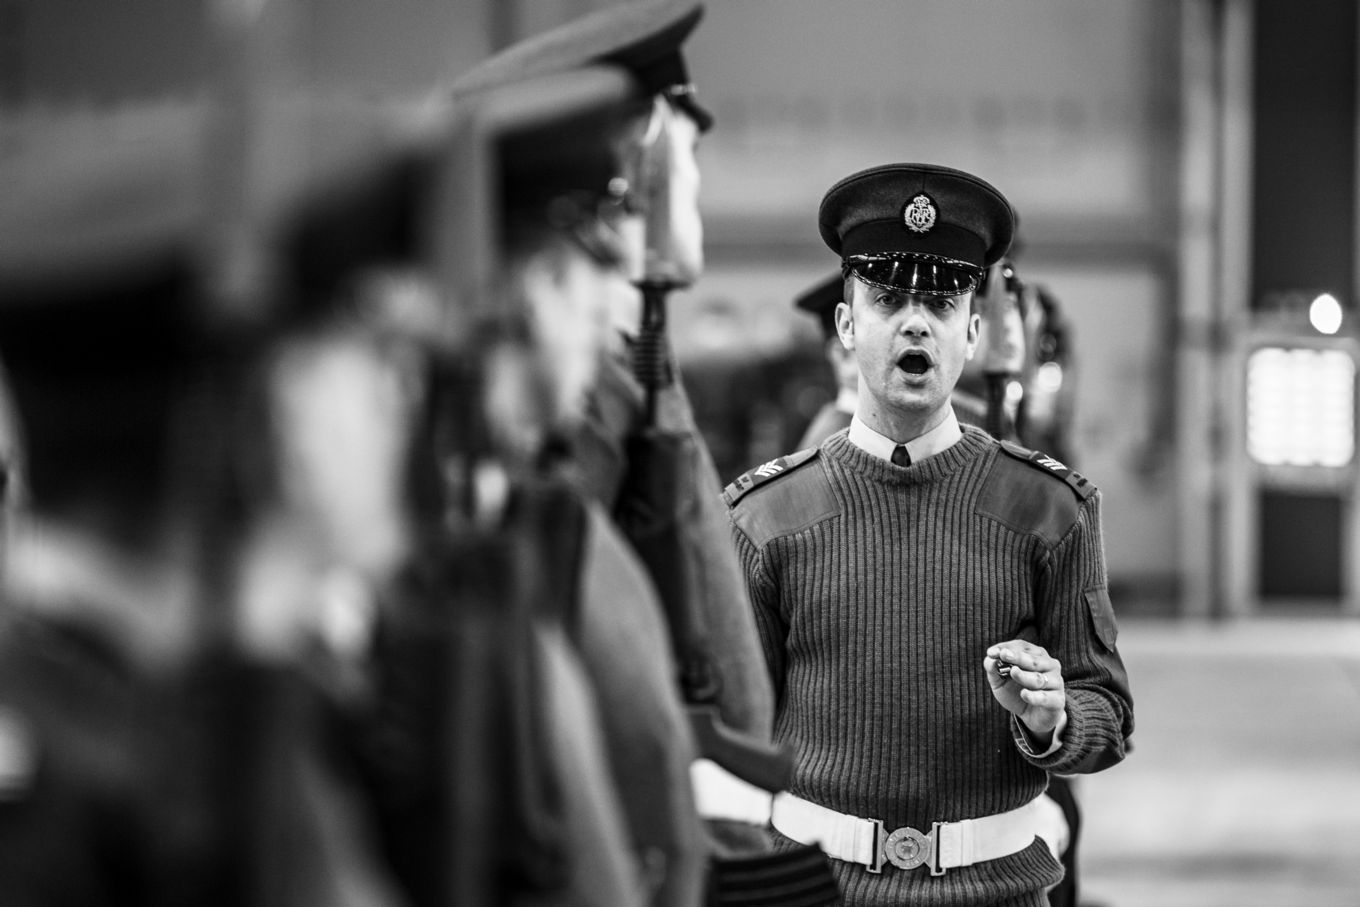 Image from the drill rehearsals at RAF Wittering